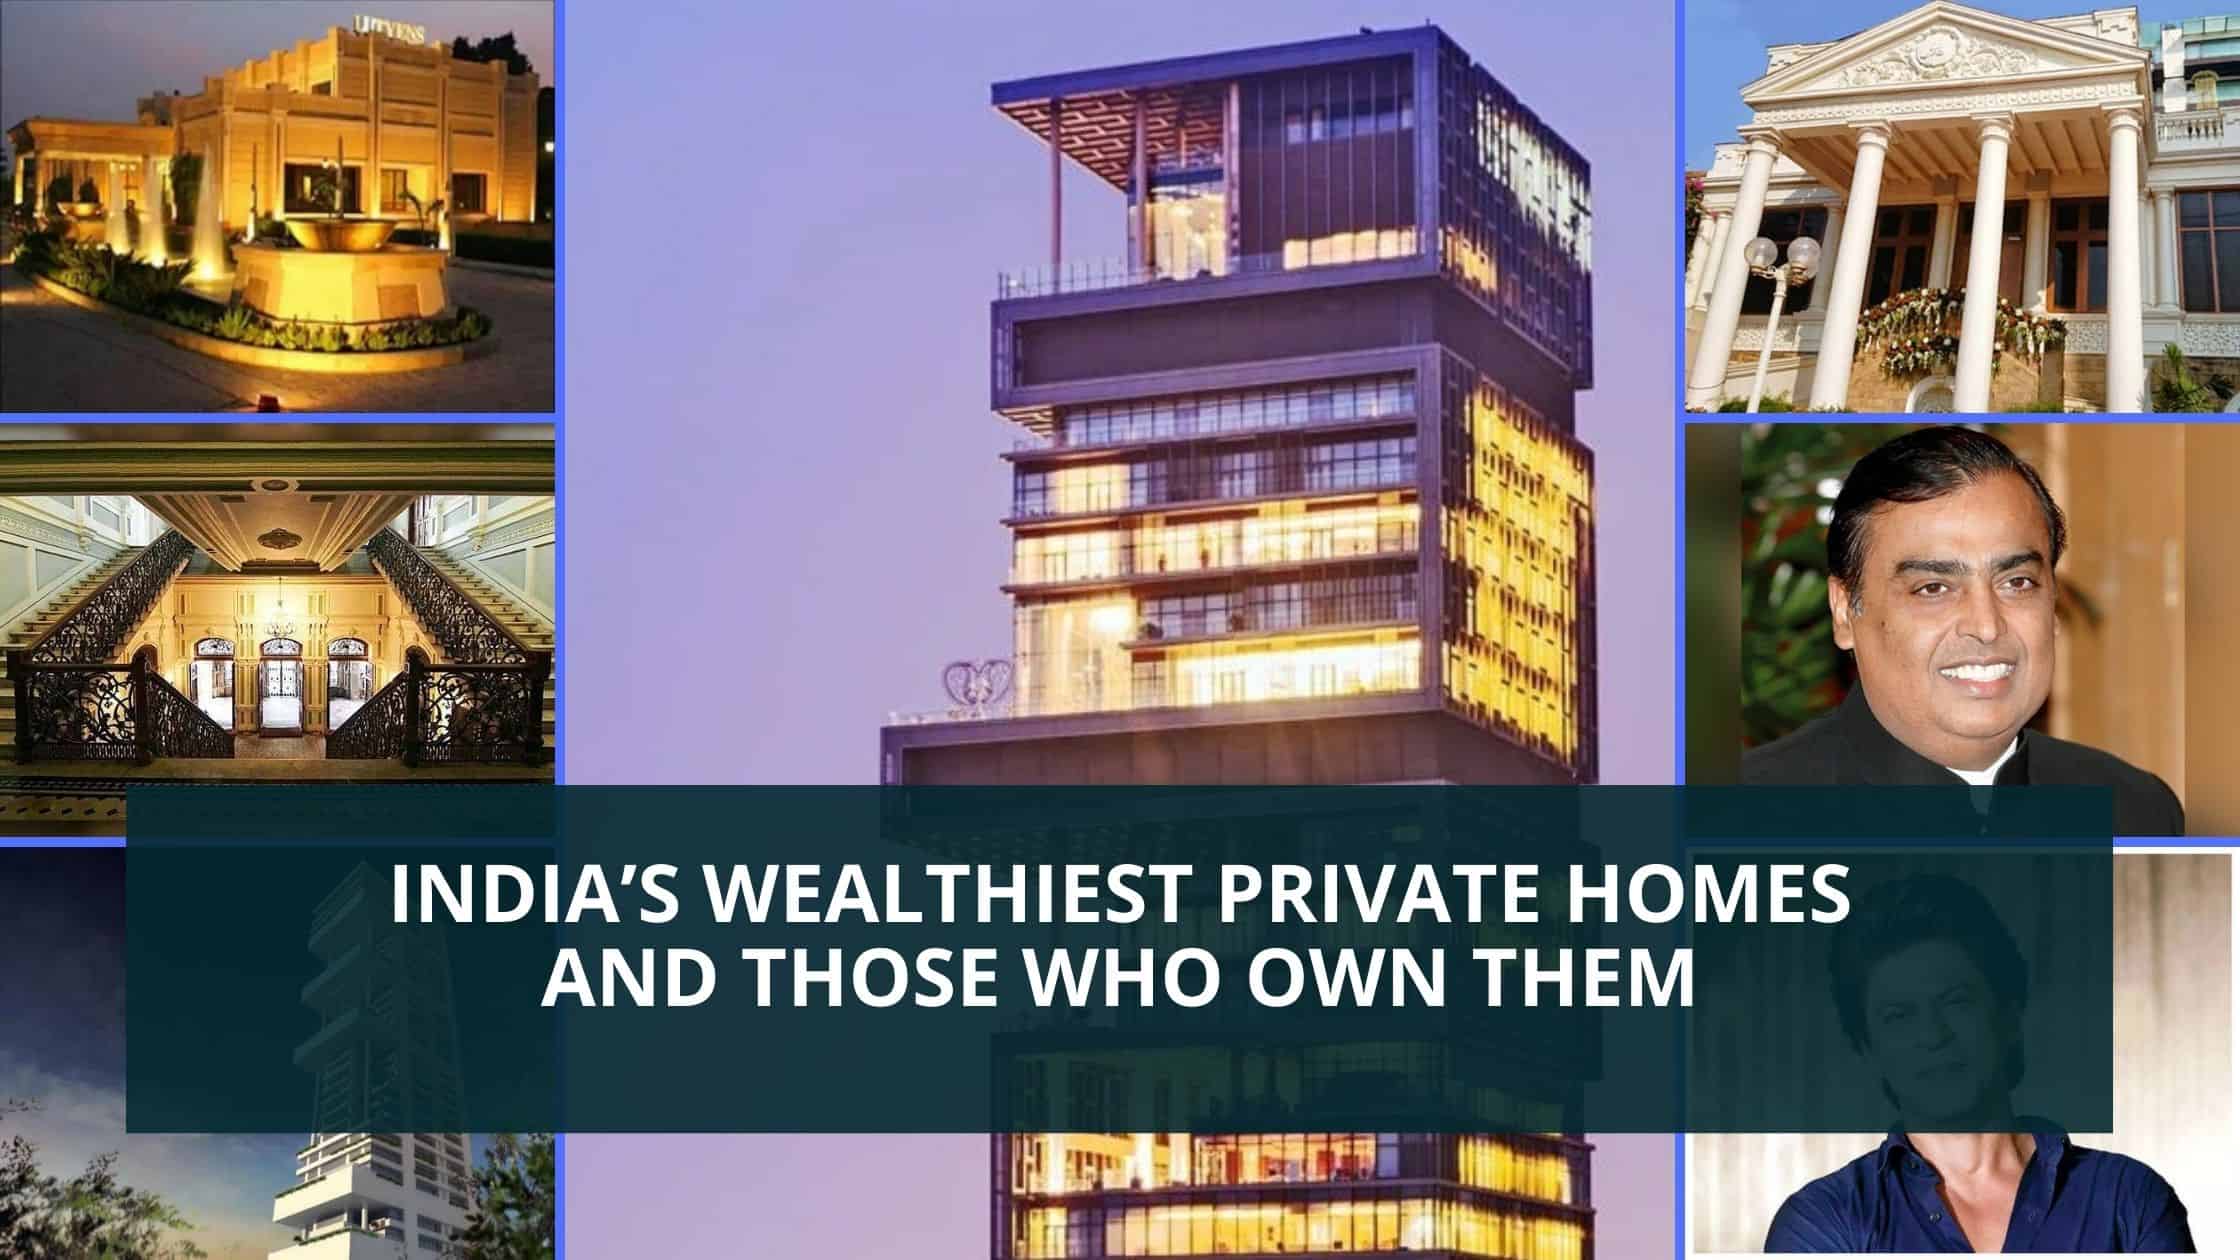 Indias-Wealthiest-Private-Homes-and-Those-Who-Own-Them